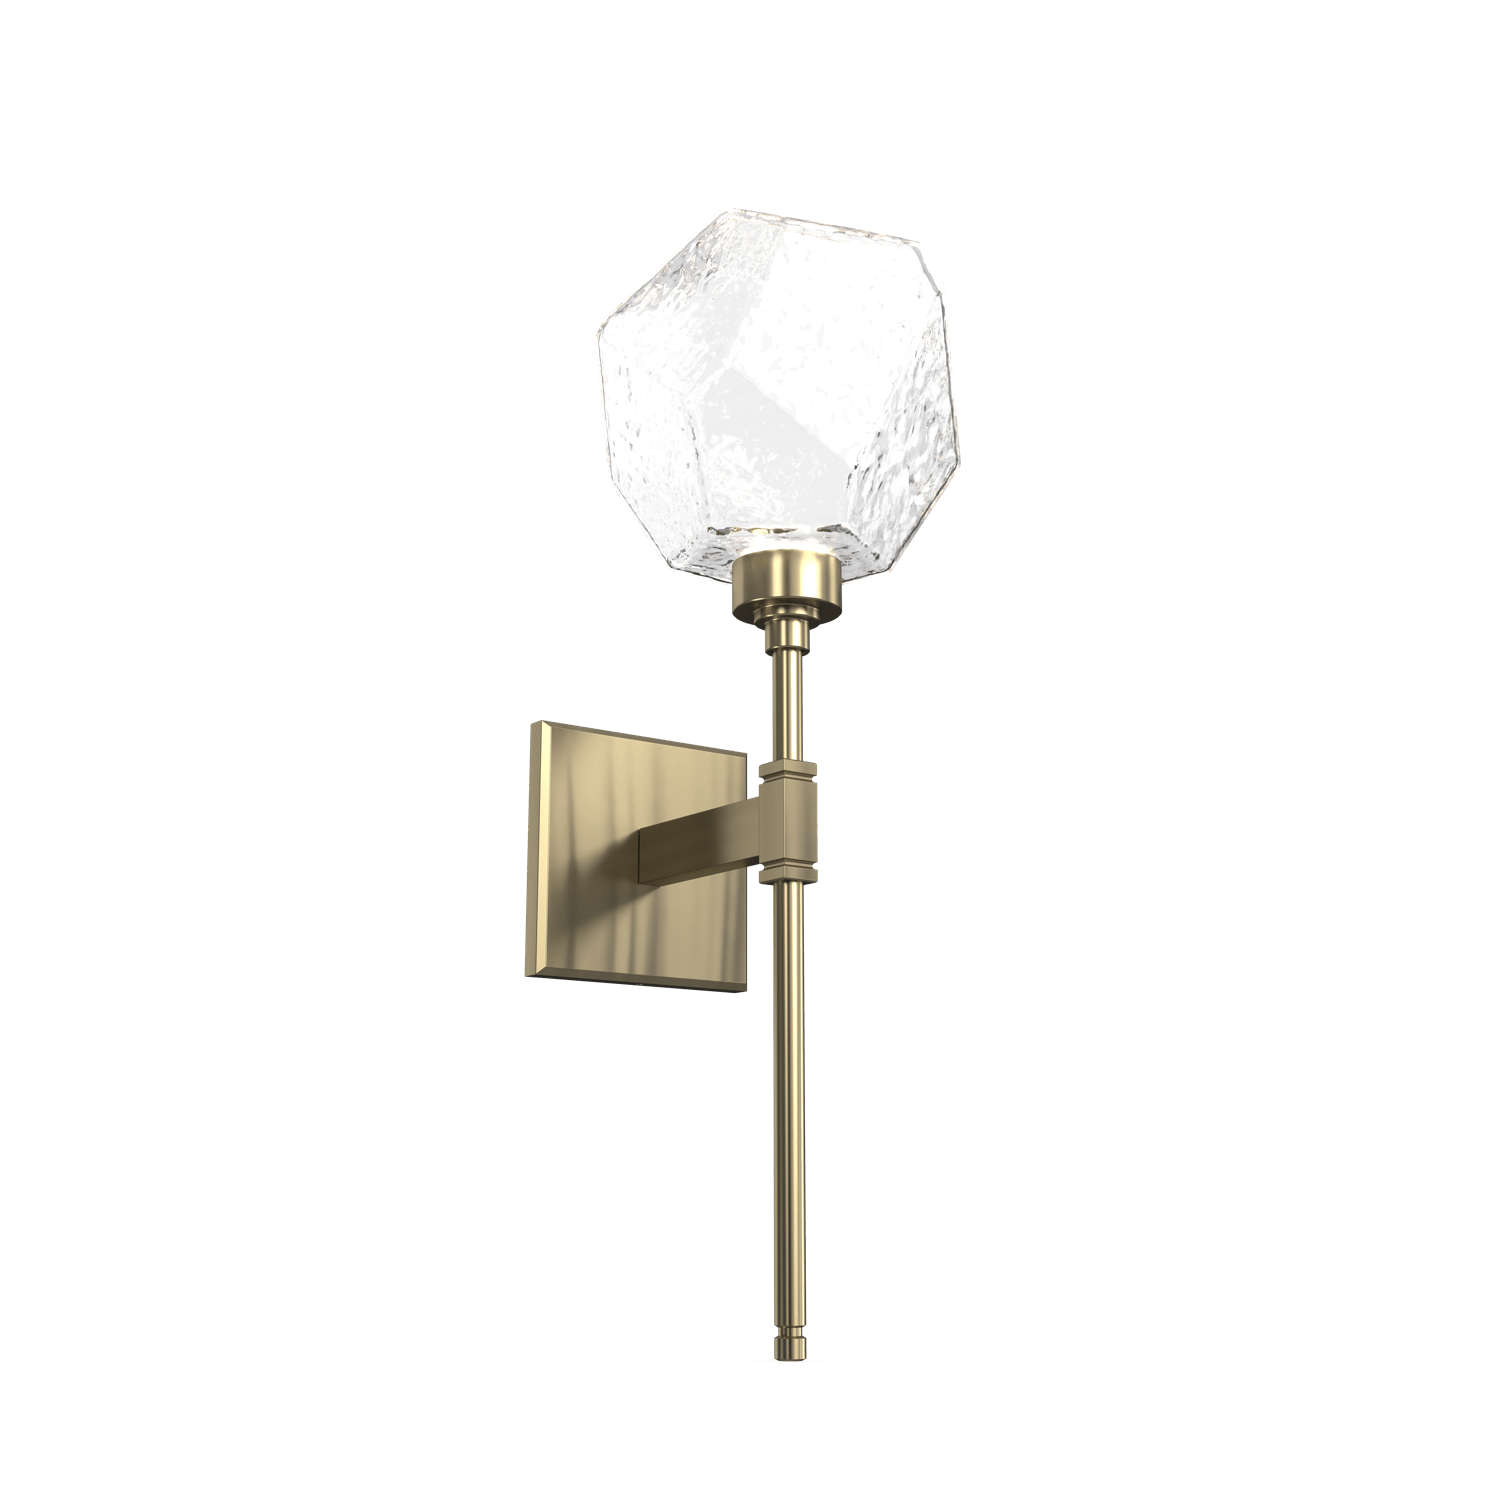 IDB0039-08-HB-C-Hammerton-Studio-Gem-belvedere-wall-sconce-with-heritage-brass-finish-and-clear-blown-glass-shades-and-LED-lamping